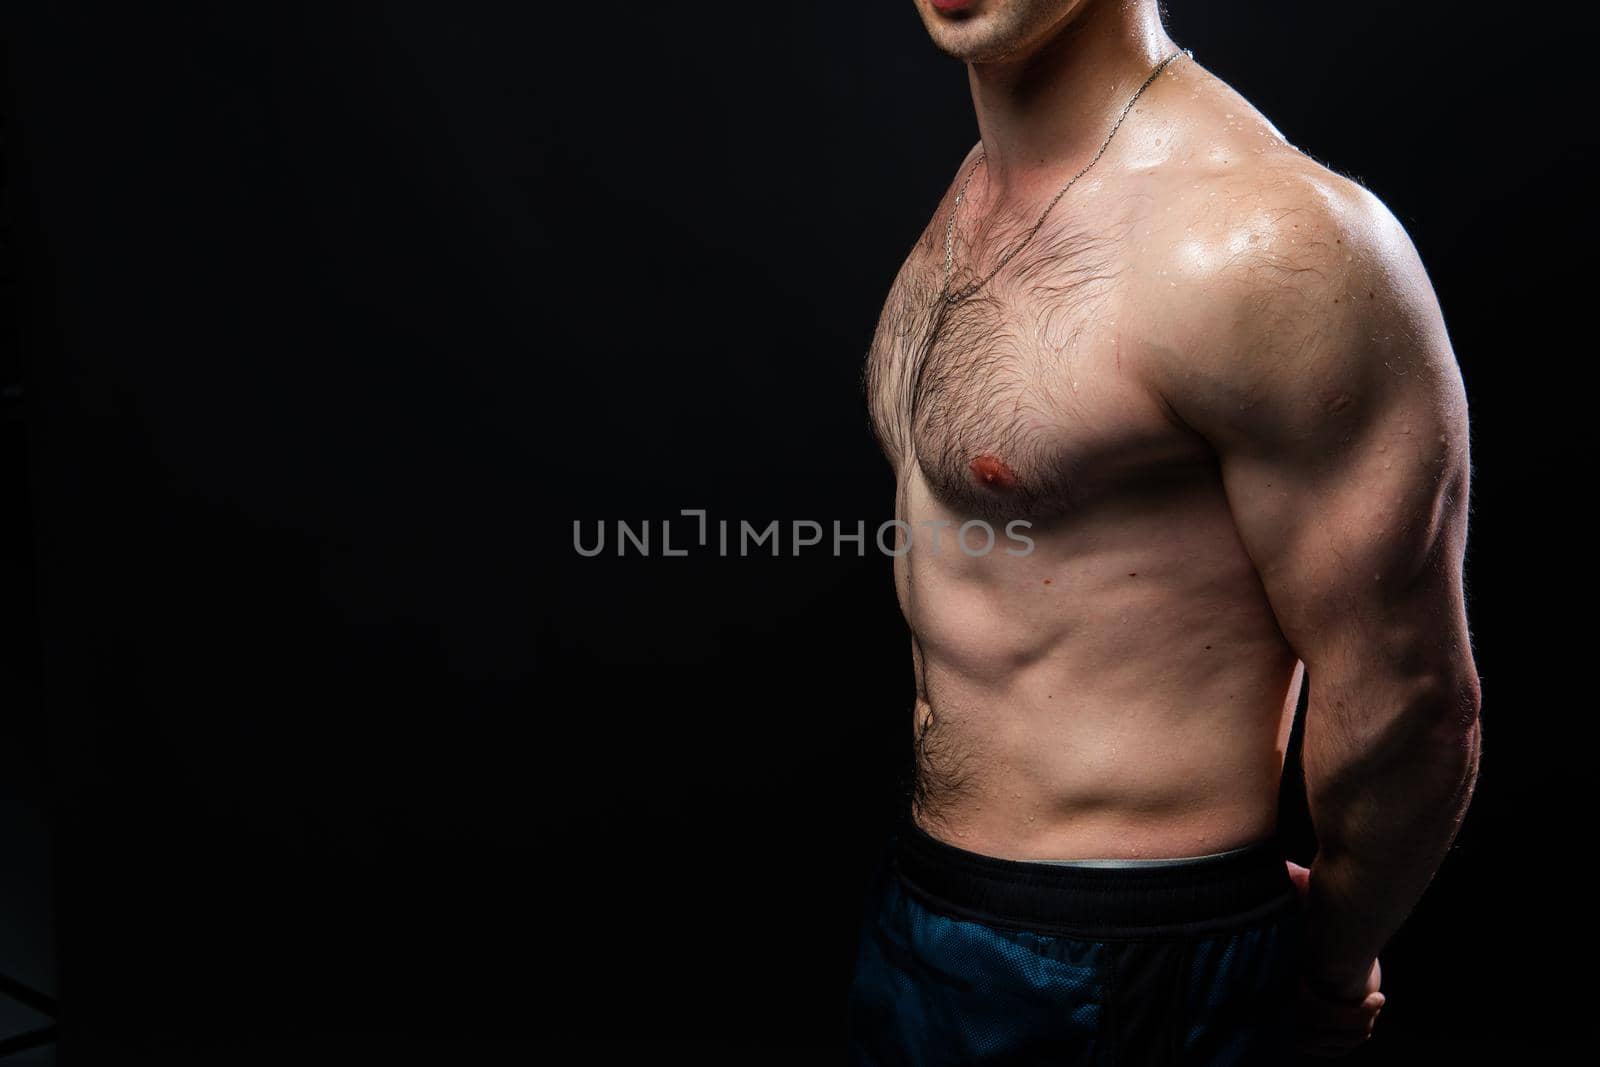 Man on black background keeps dumbbells pumped up in fitness muscle body exercise lifting powerful, healthy lifestyle. Lift sportive guy fit hands behind your back, press tense beautiful body